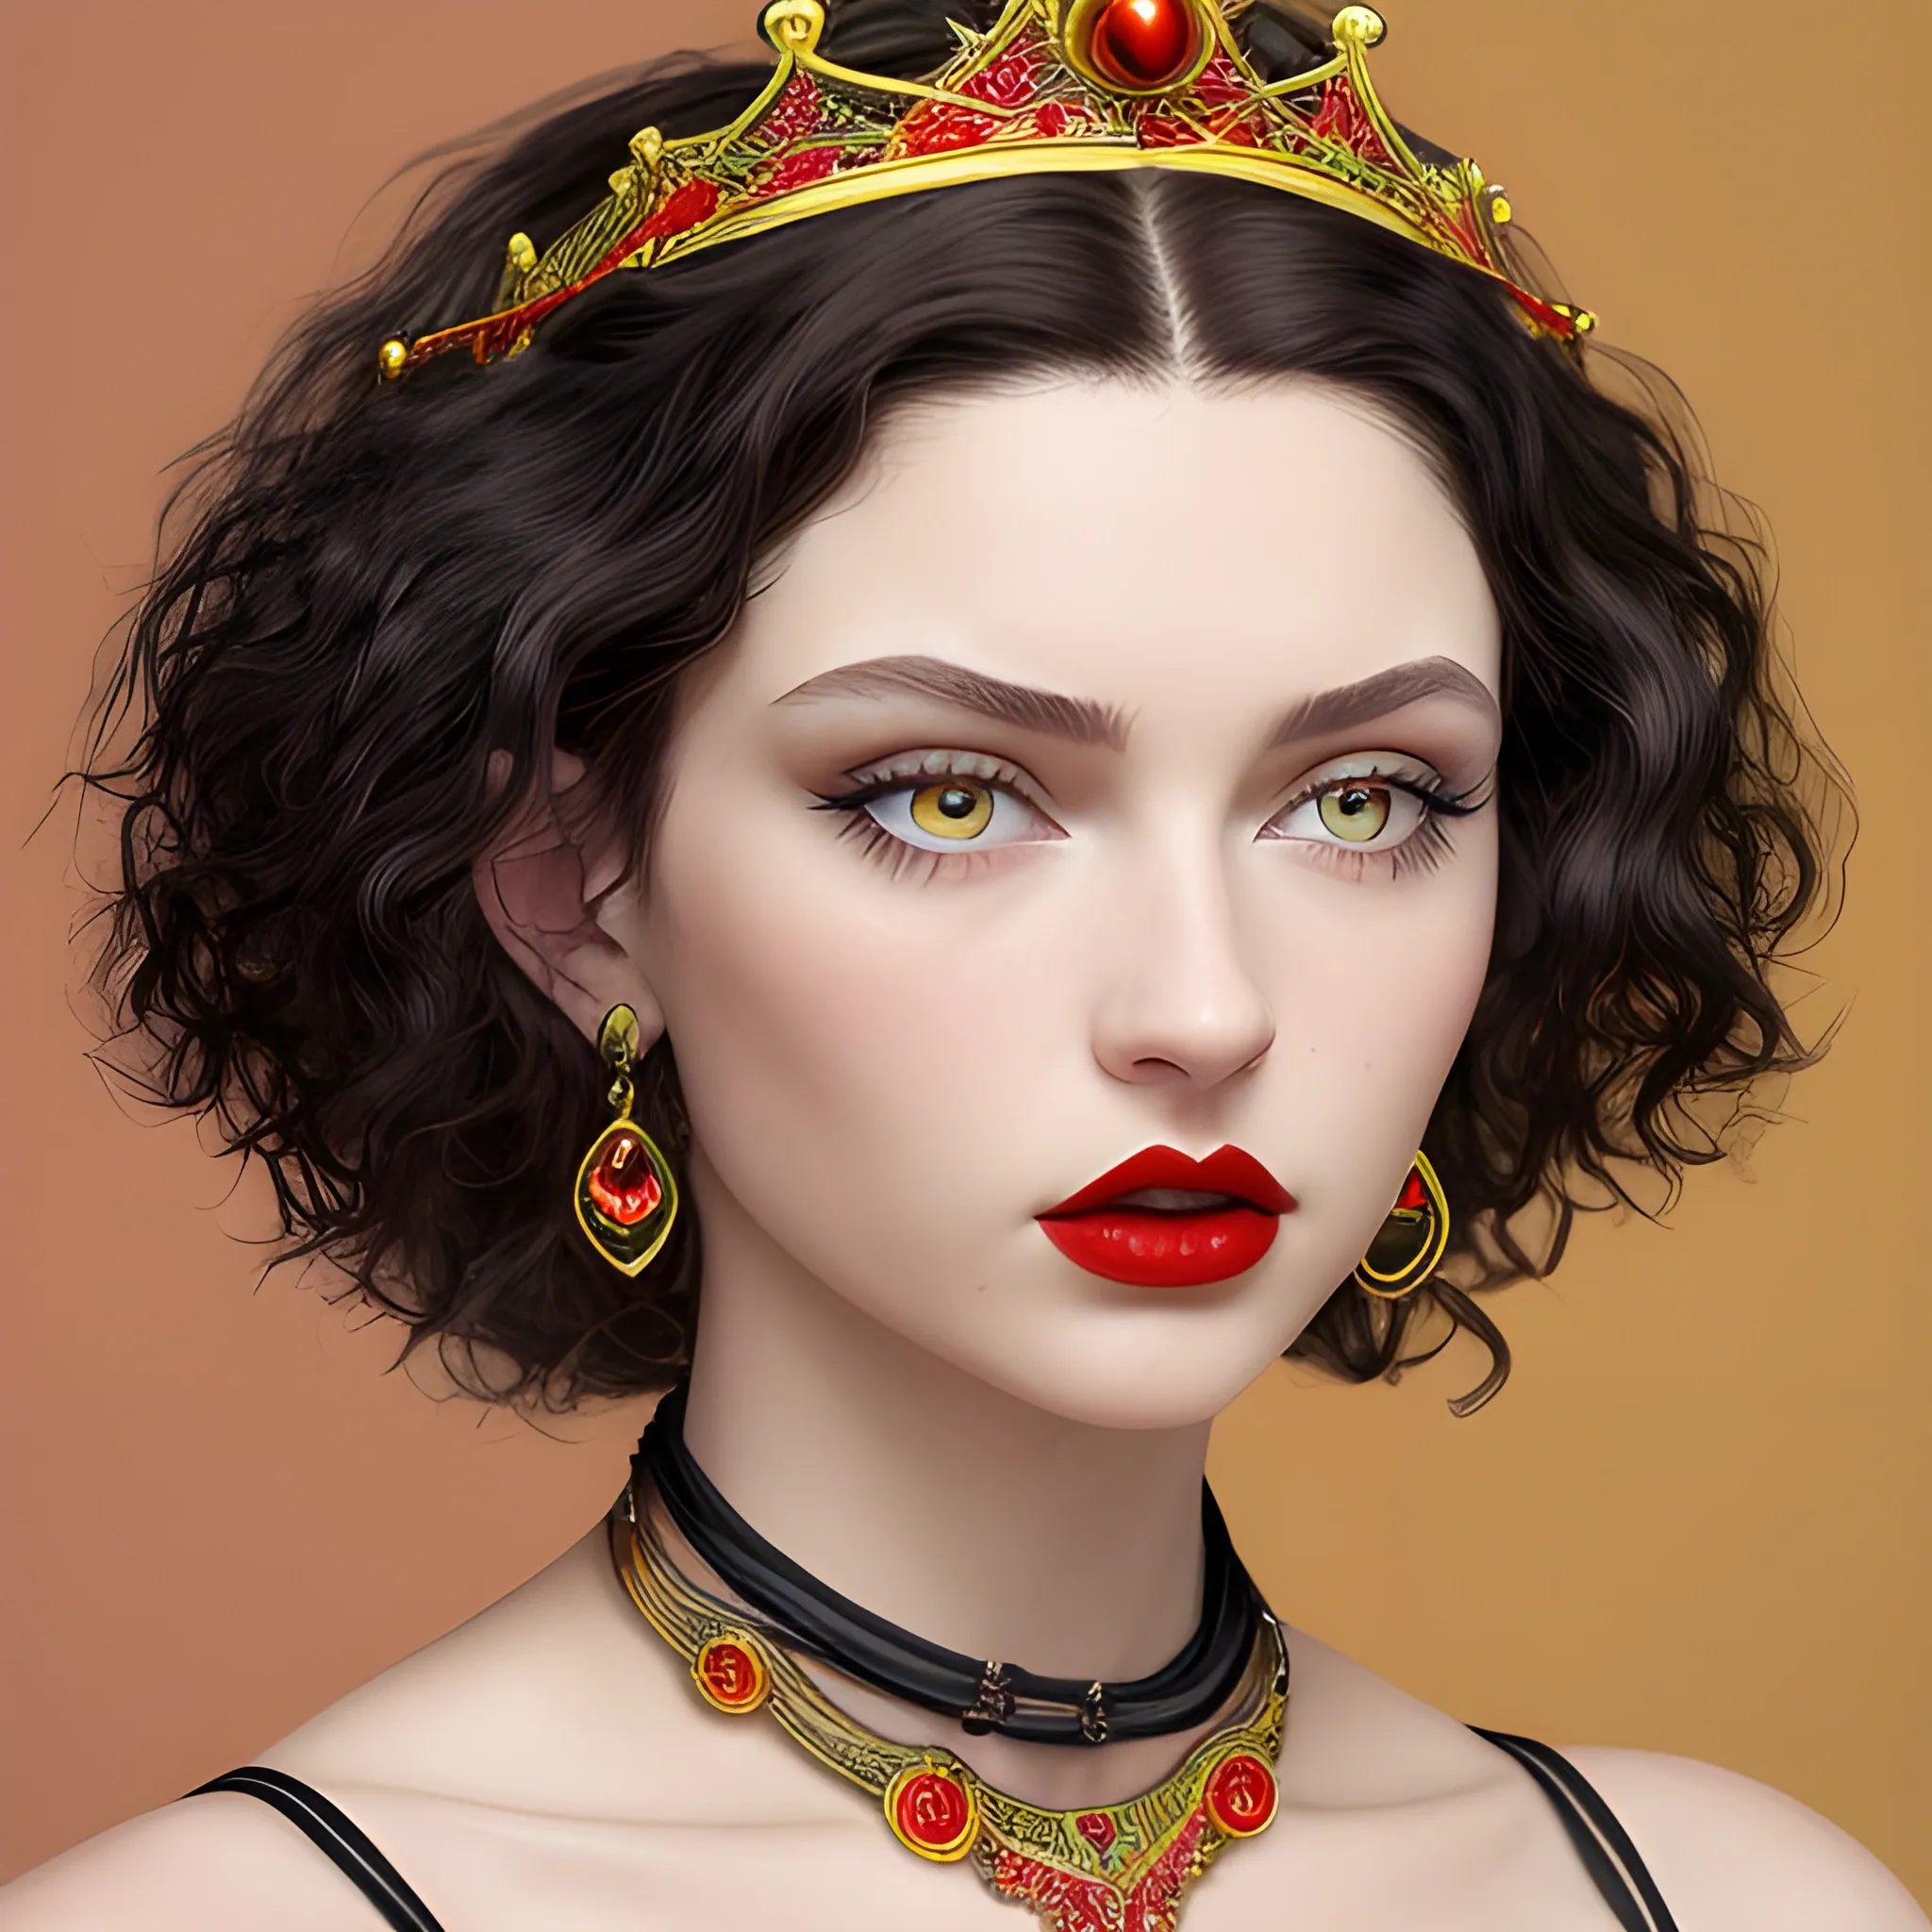 (((high detail))), best quality, Warm Colors, (detail) beautiful Caucasian female with back-length curly black hair, long eyelashes, red lips, big hazel eyes, makeup, pronounced jawline, wearing sensual breasts big, curvy, wearing a queen crown with a colorful background similar to a davinci painting, wearing a spaguetti strap black dress and a chocker as a neckless